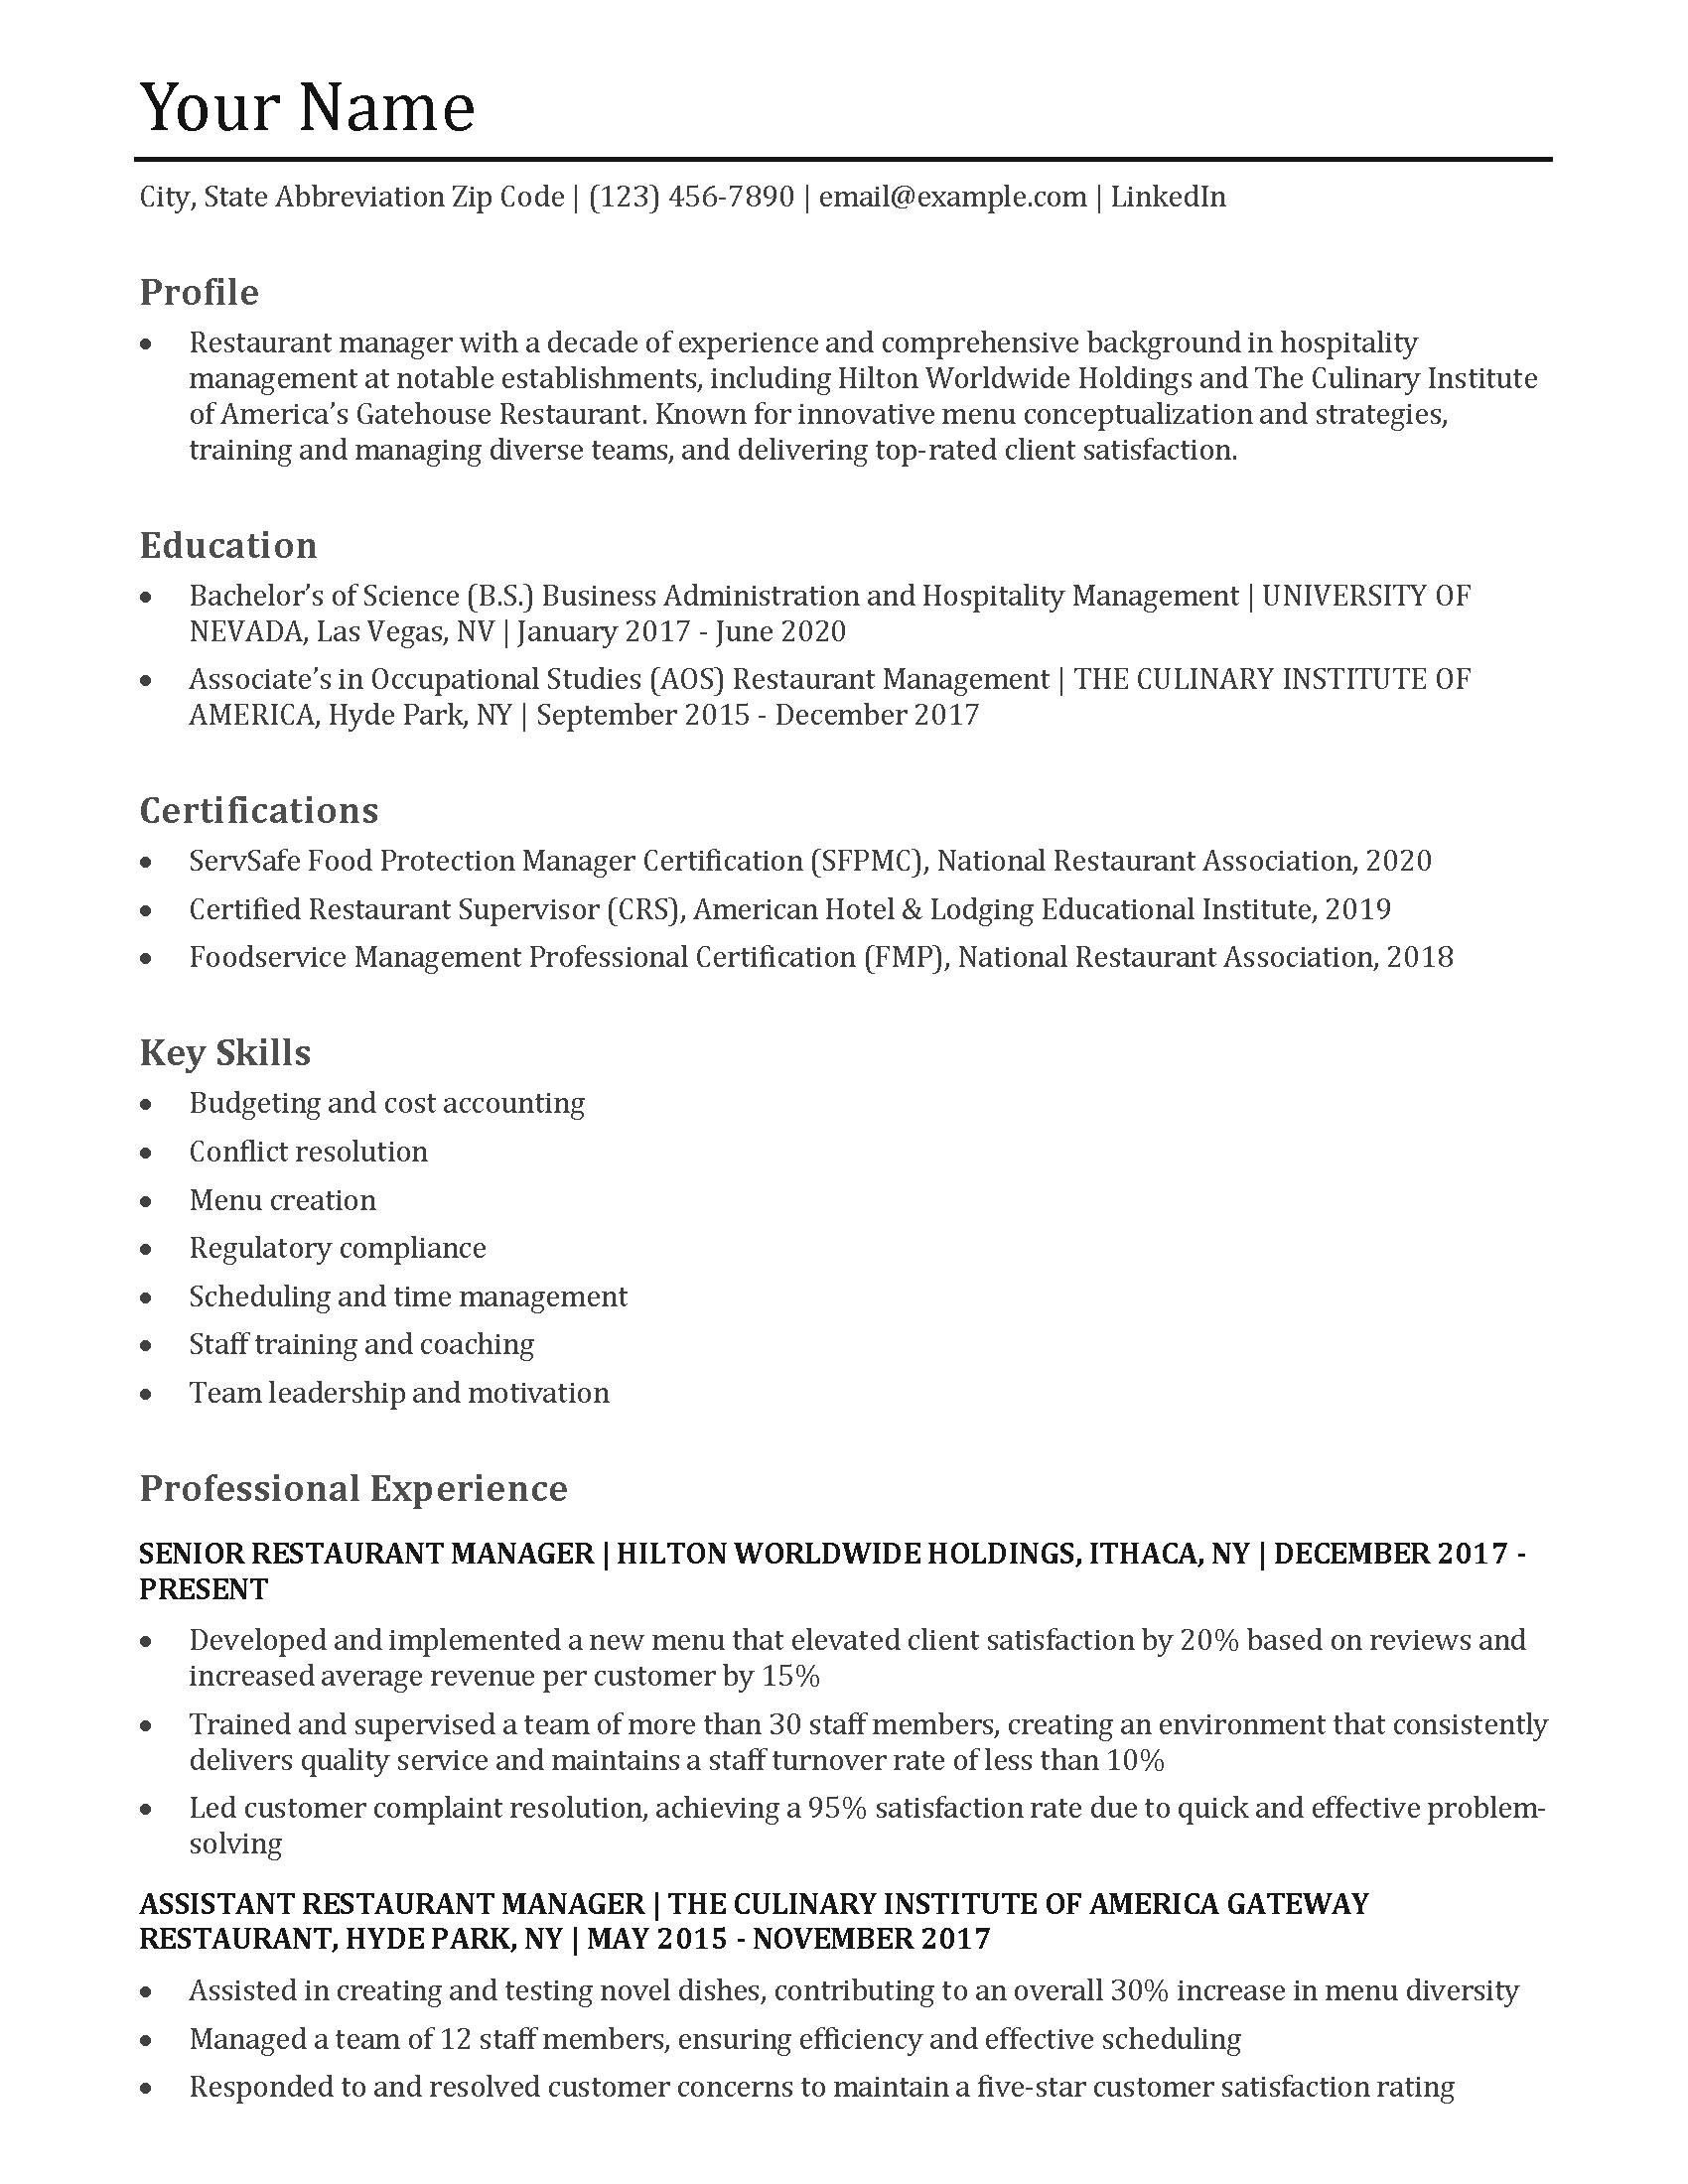 Restaurant Manager Resume Templates and Examples Image